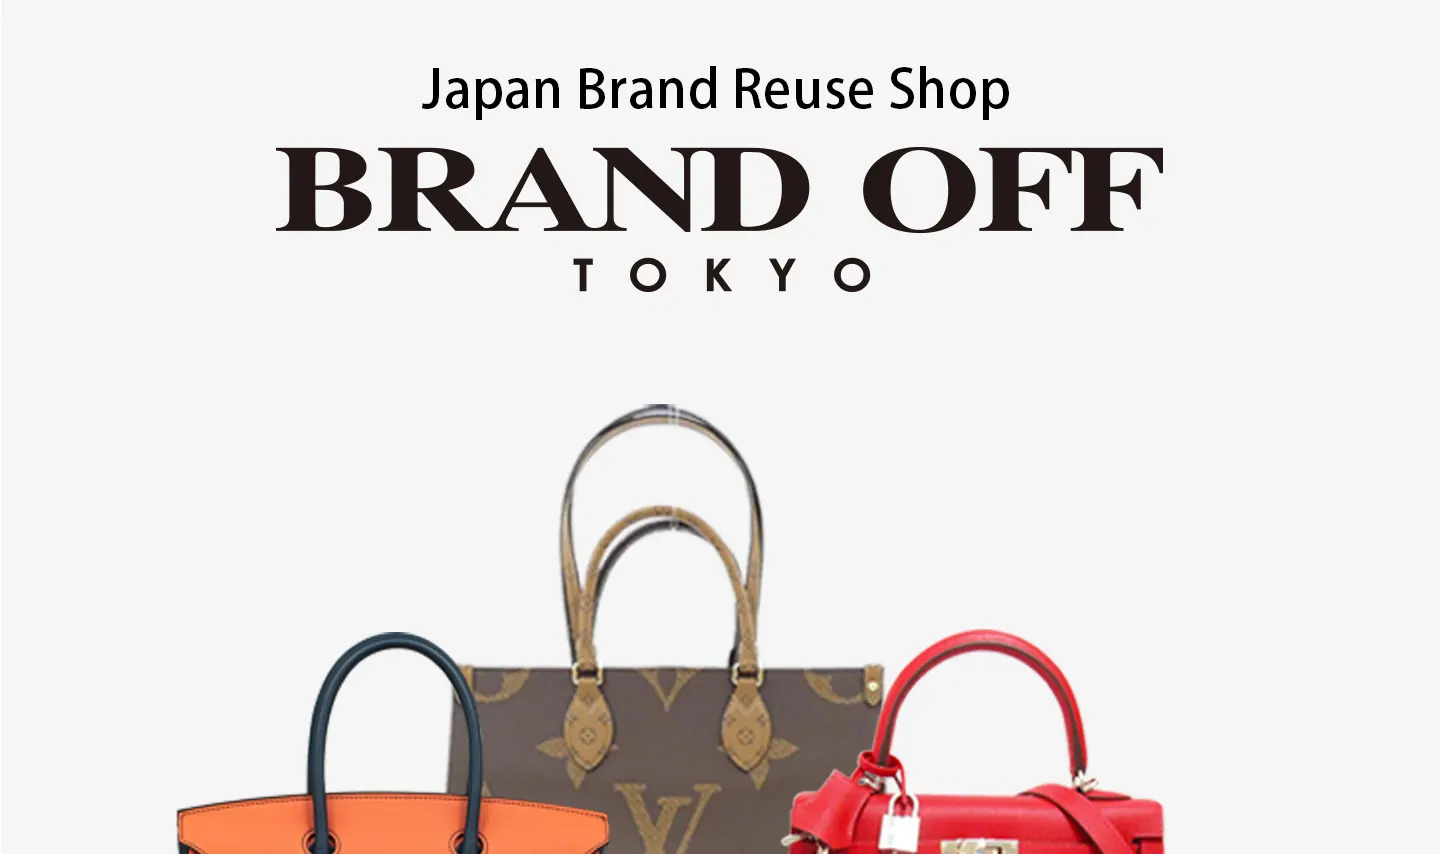 BRANDOFF Tourist Privilege Discount Coupon for Second-hand Luxury Goods) -  Klook United States